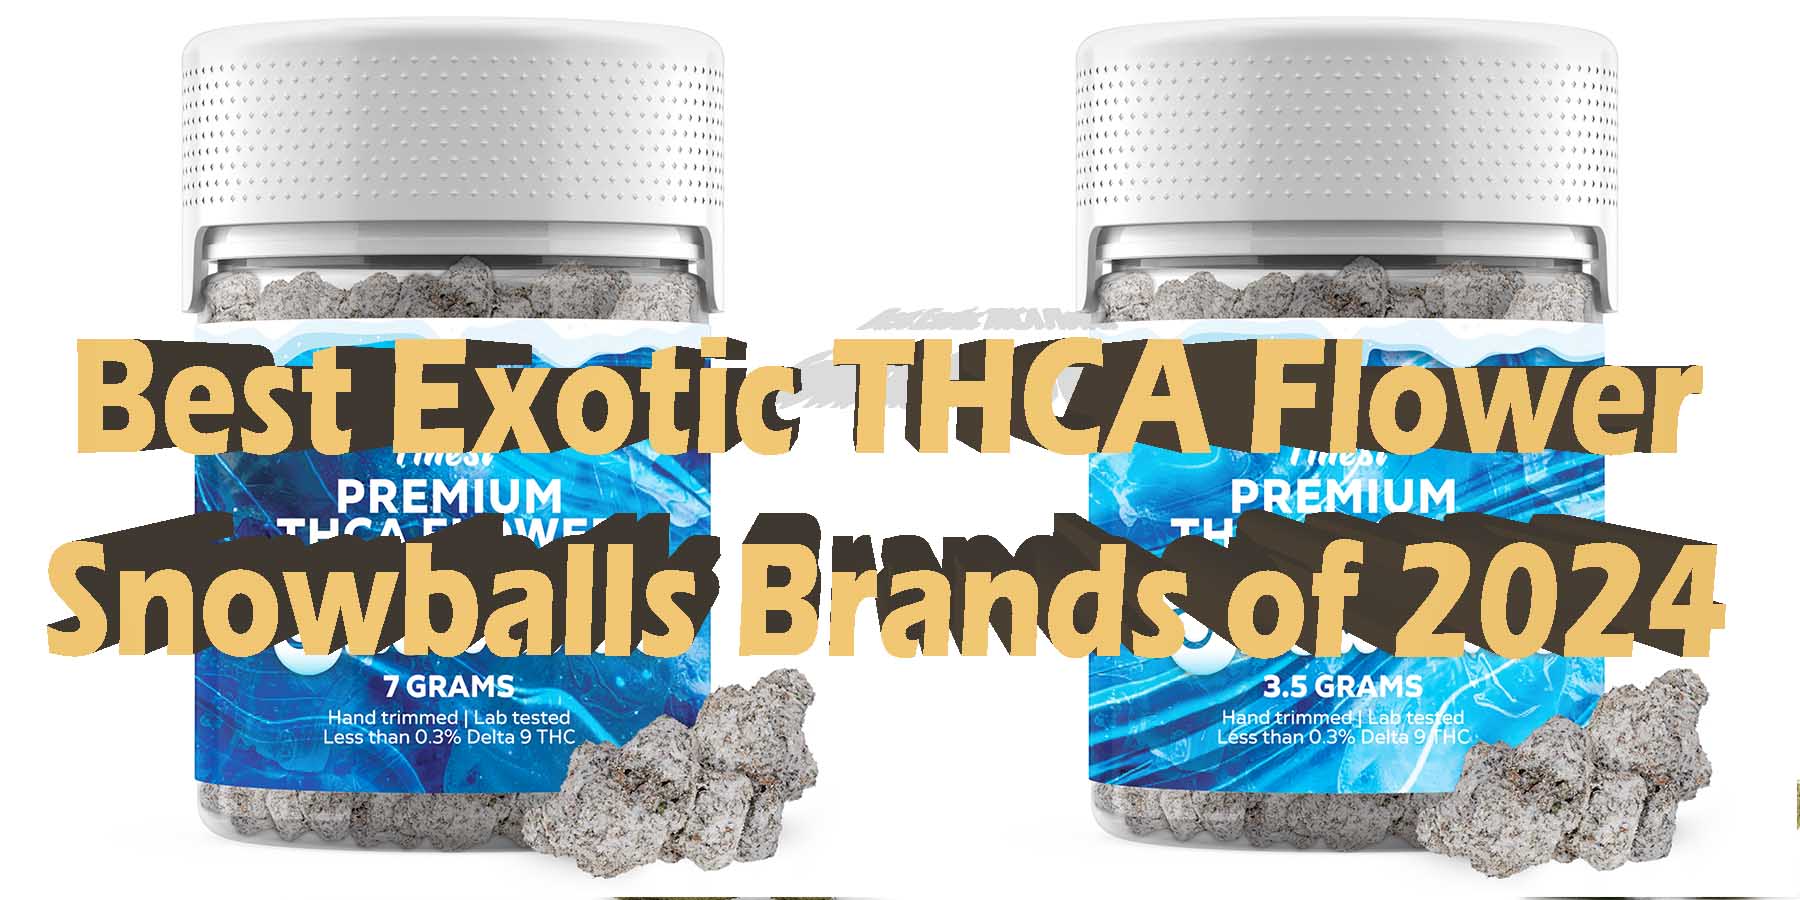 Best Exotic THCA Flower Snowballs Brands of 2024 Legal THC LowestPrice Coupon Discount For Smoking Best High Smoke Shop Online Near Me Online Smoke Shop StrongestBrand Best Bloomz